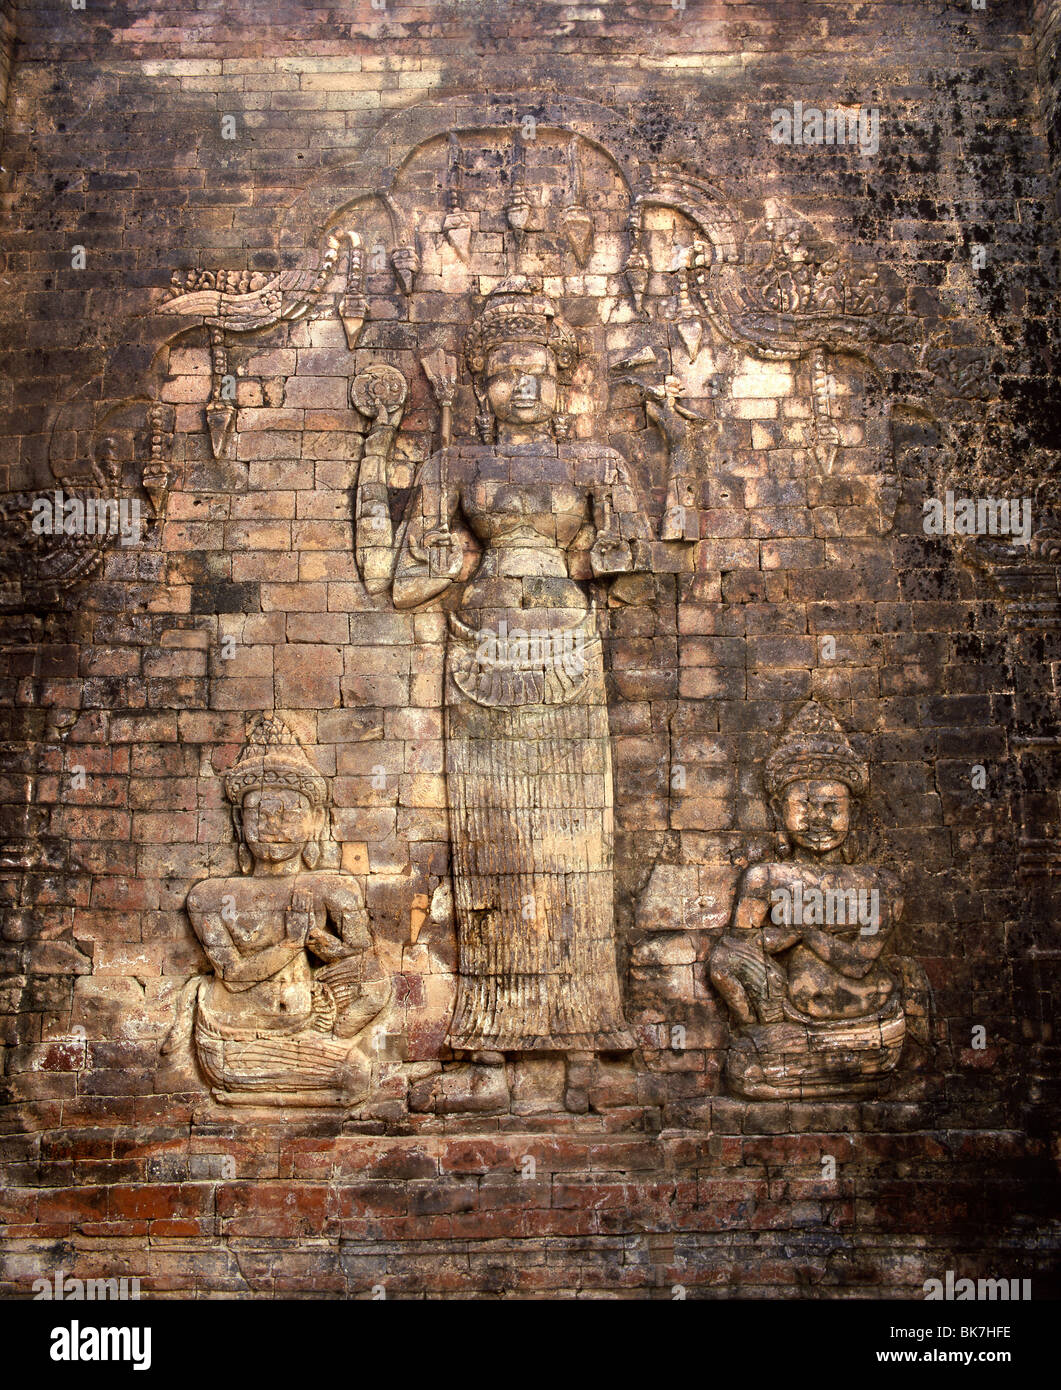 Prasat Kravan, dating from the early 10th century, Angkor, UNESCO World Heritage Site, Cambodia, Indochina, Southeast Asia, Asia Stock Photo